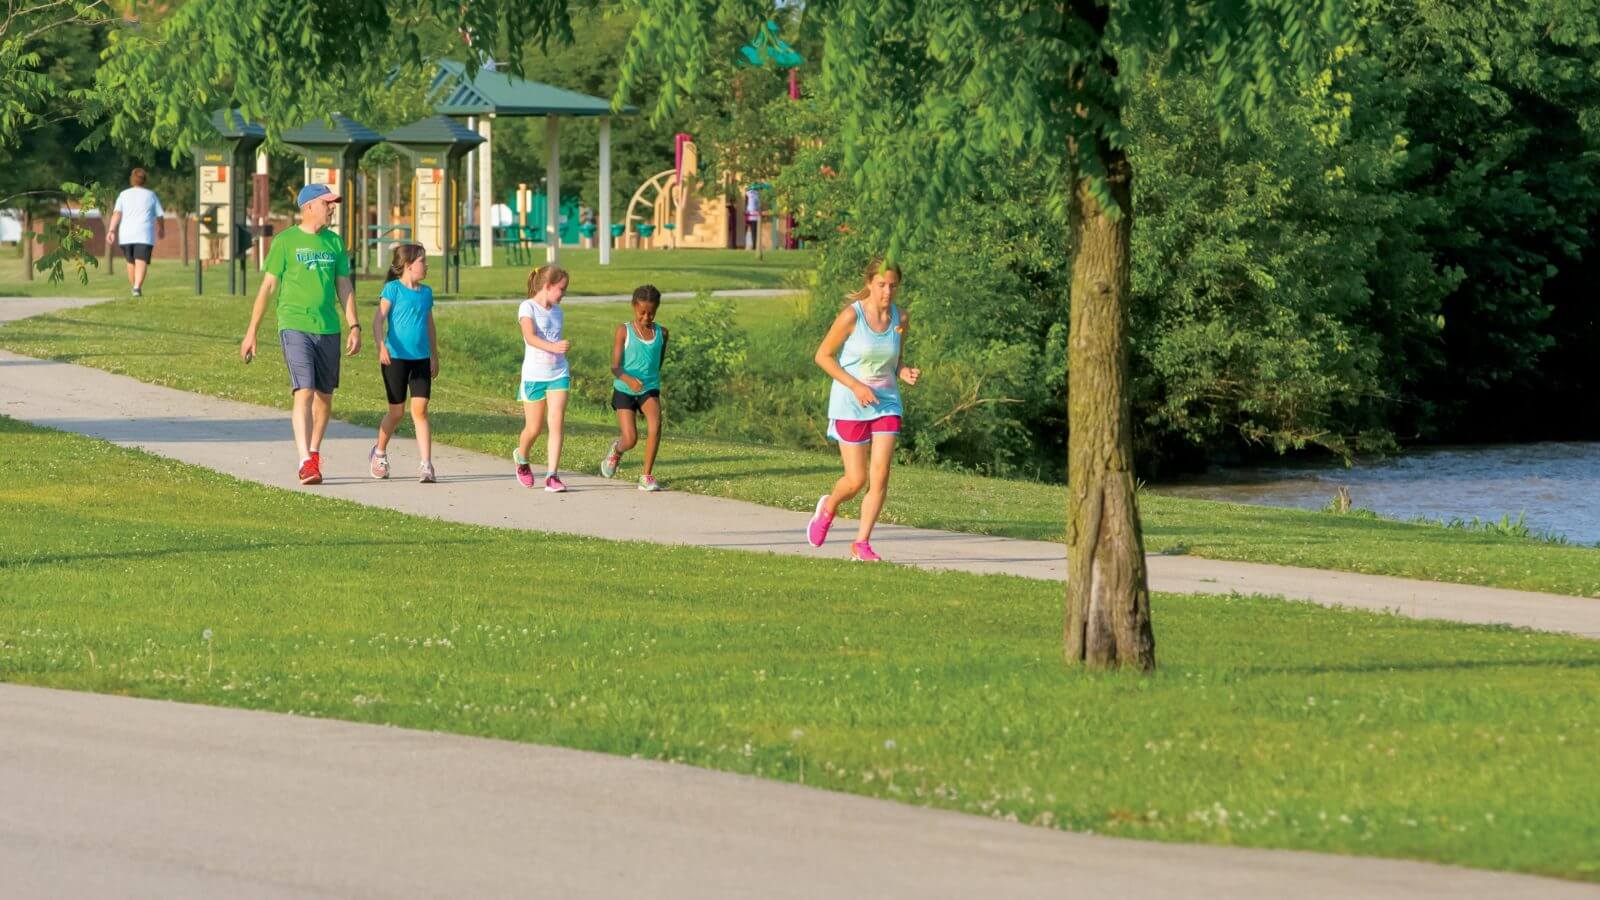 Woman jogging near park on greenway trail with father and kids behind her in Yorktown, Indiana